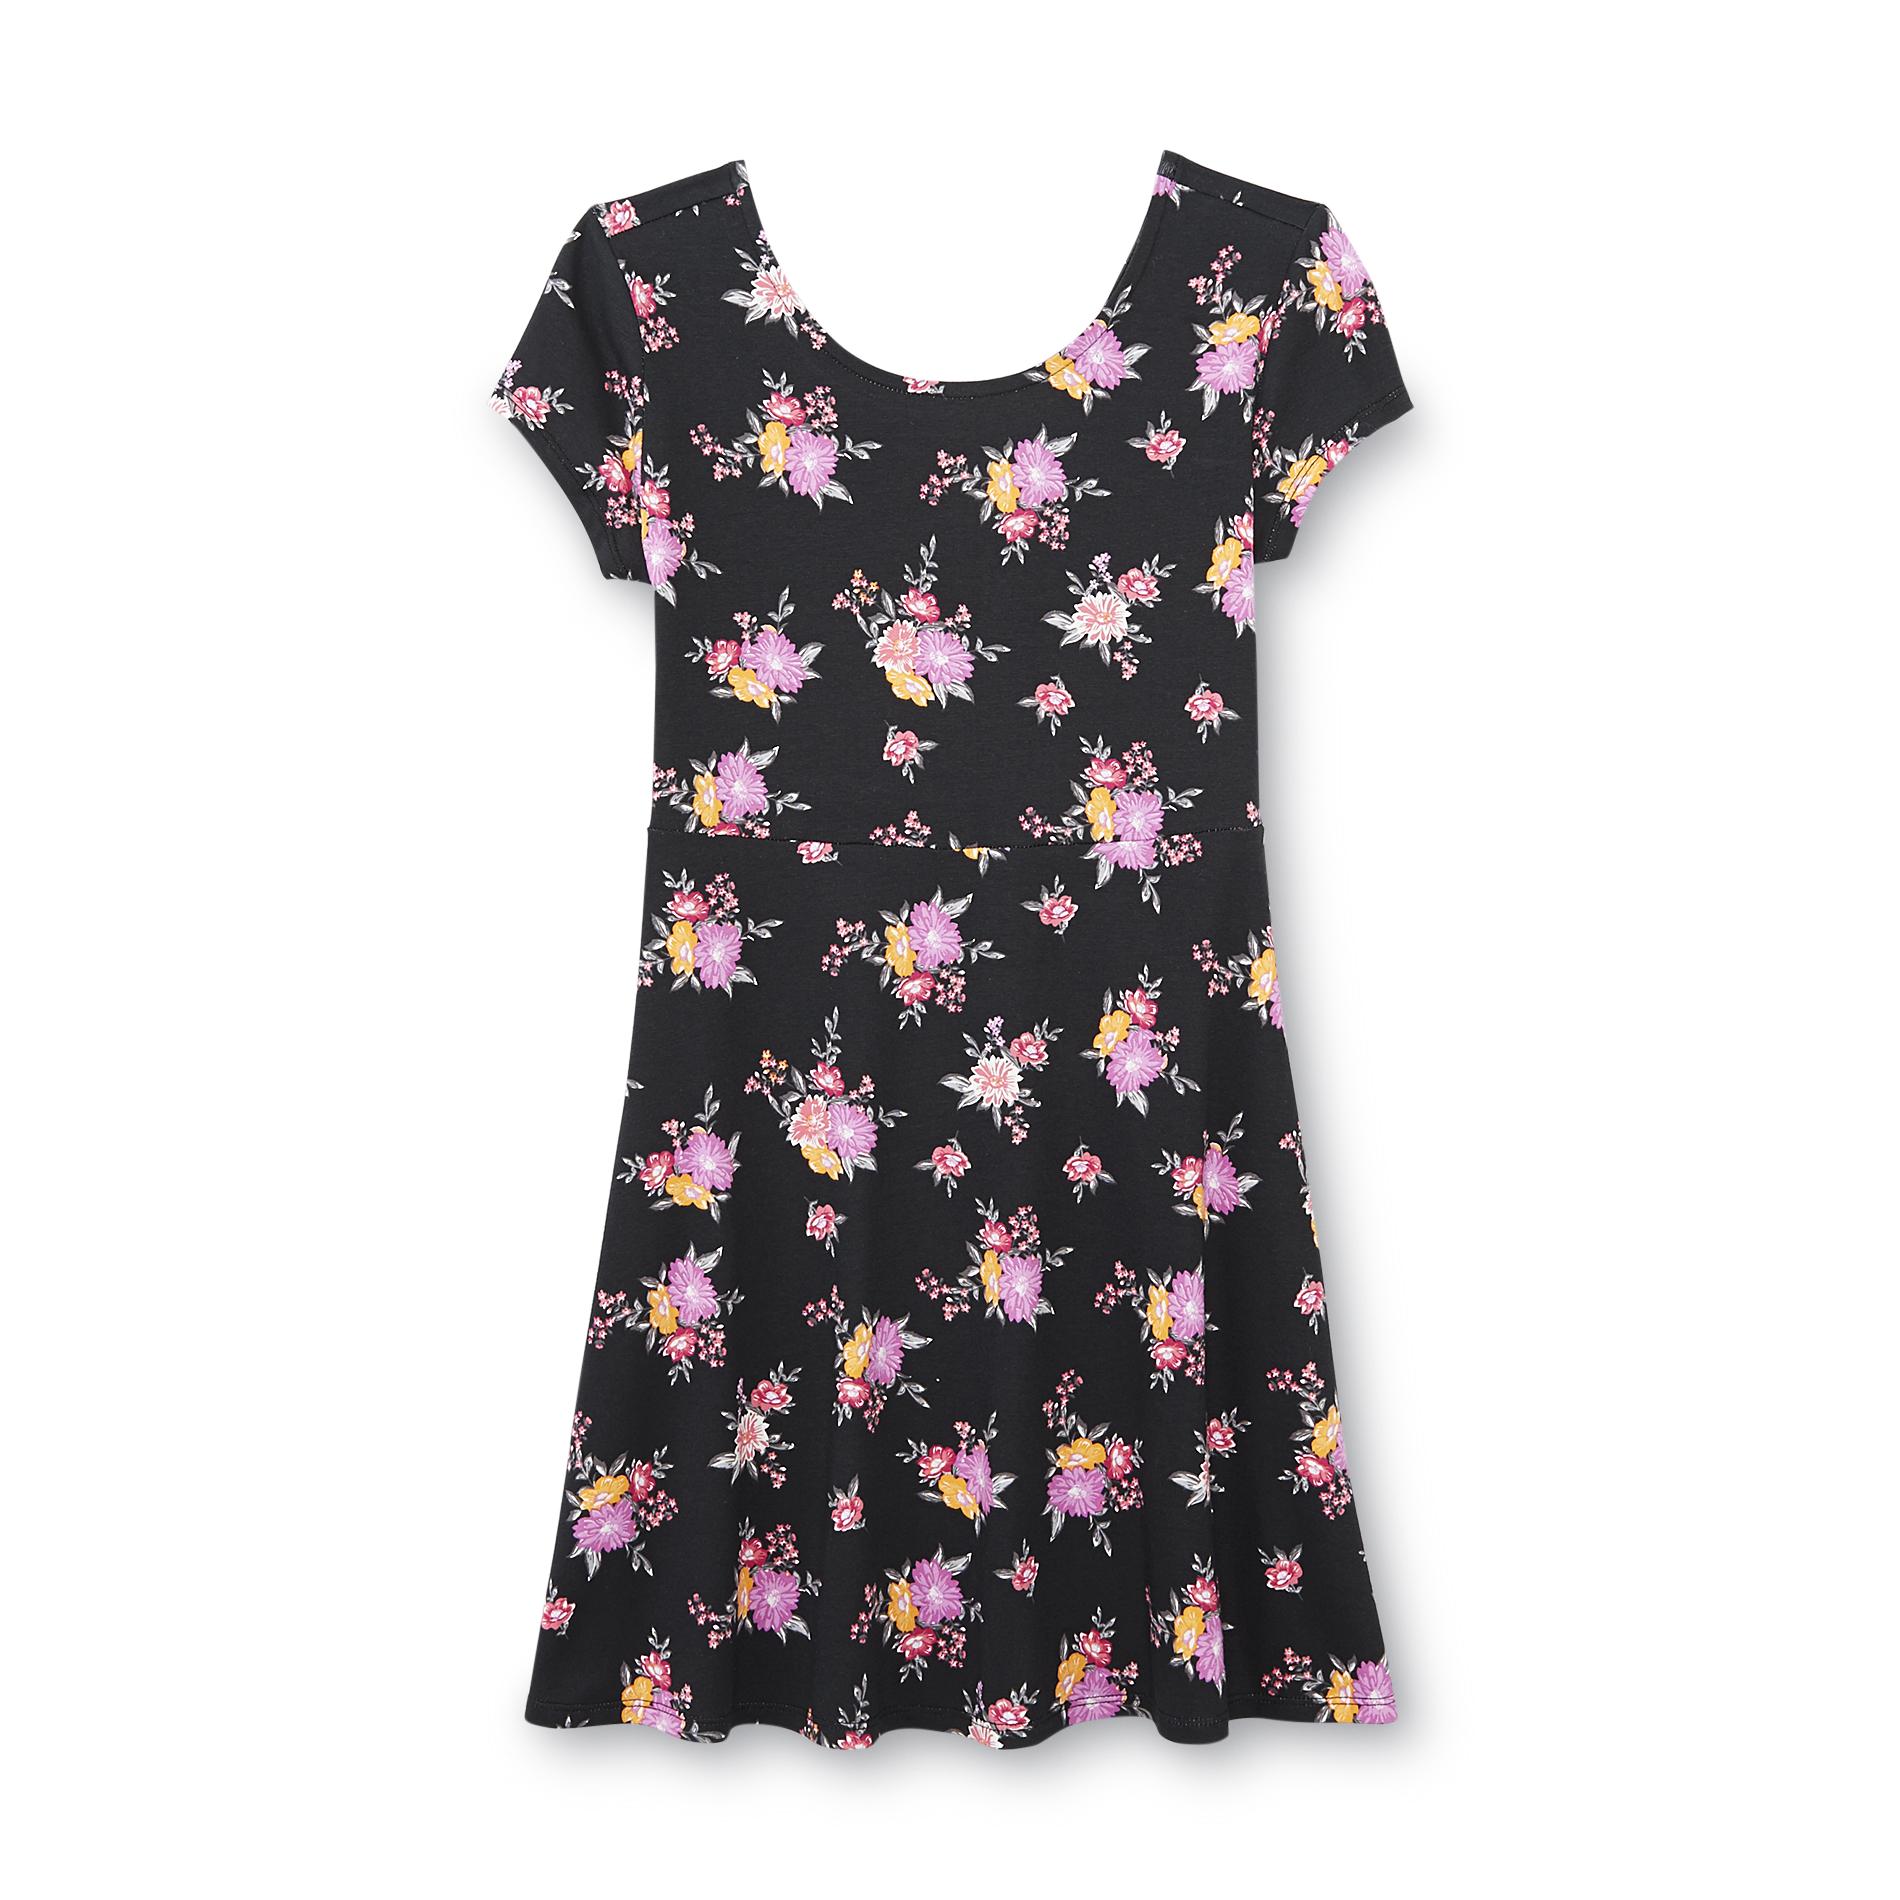 Simply Styled Girl's Skater Dress - Floral